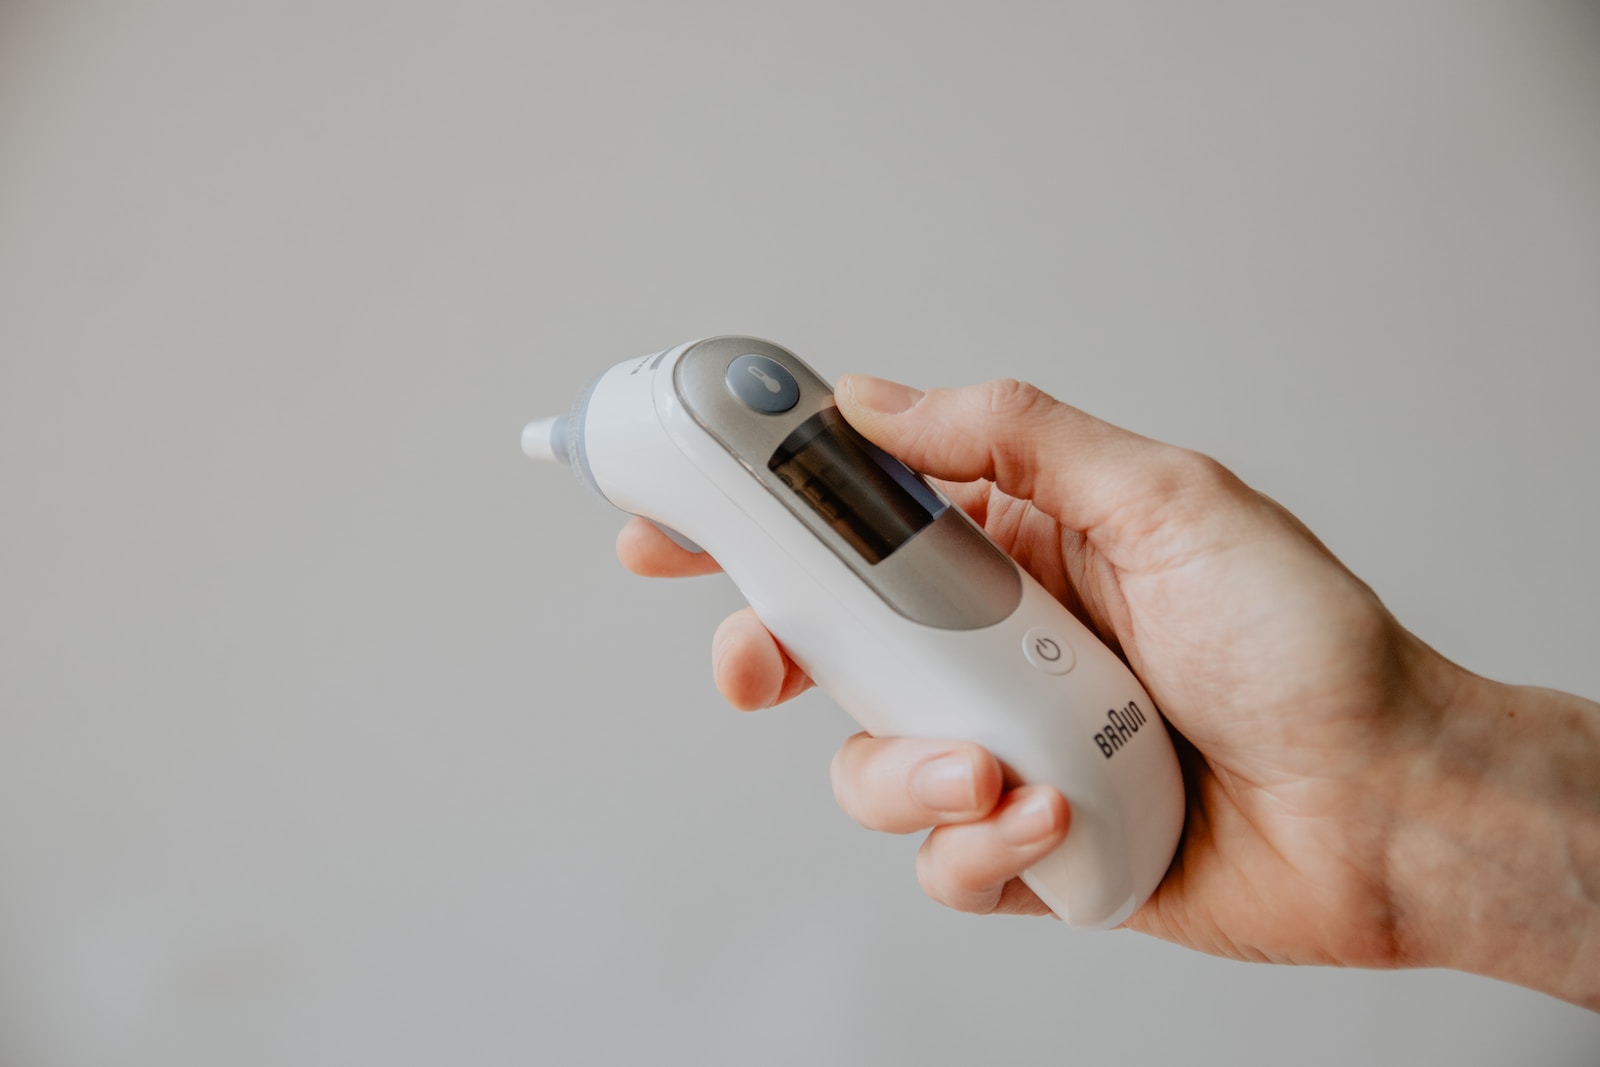 Ear thermometer for checking fever, common in ying level Heat in pericardium